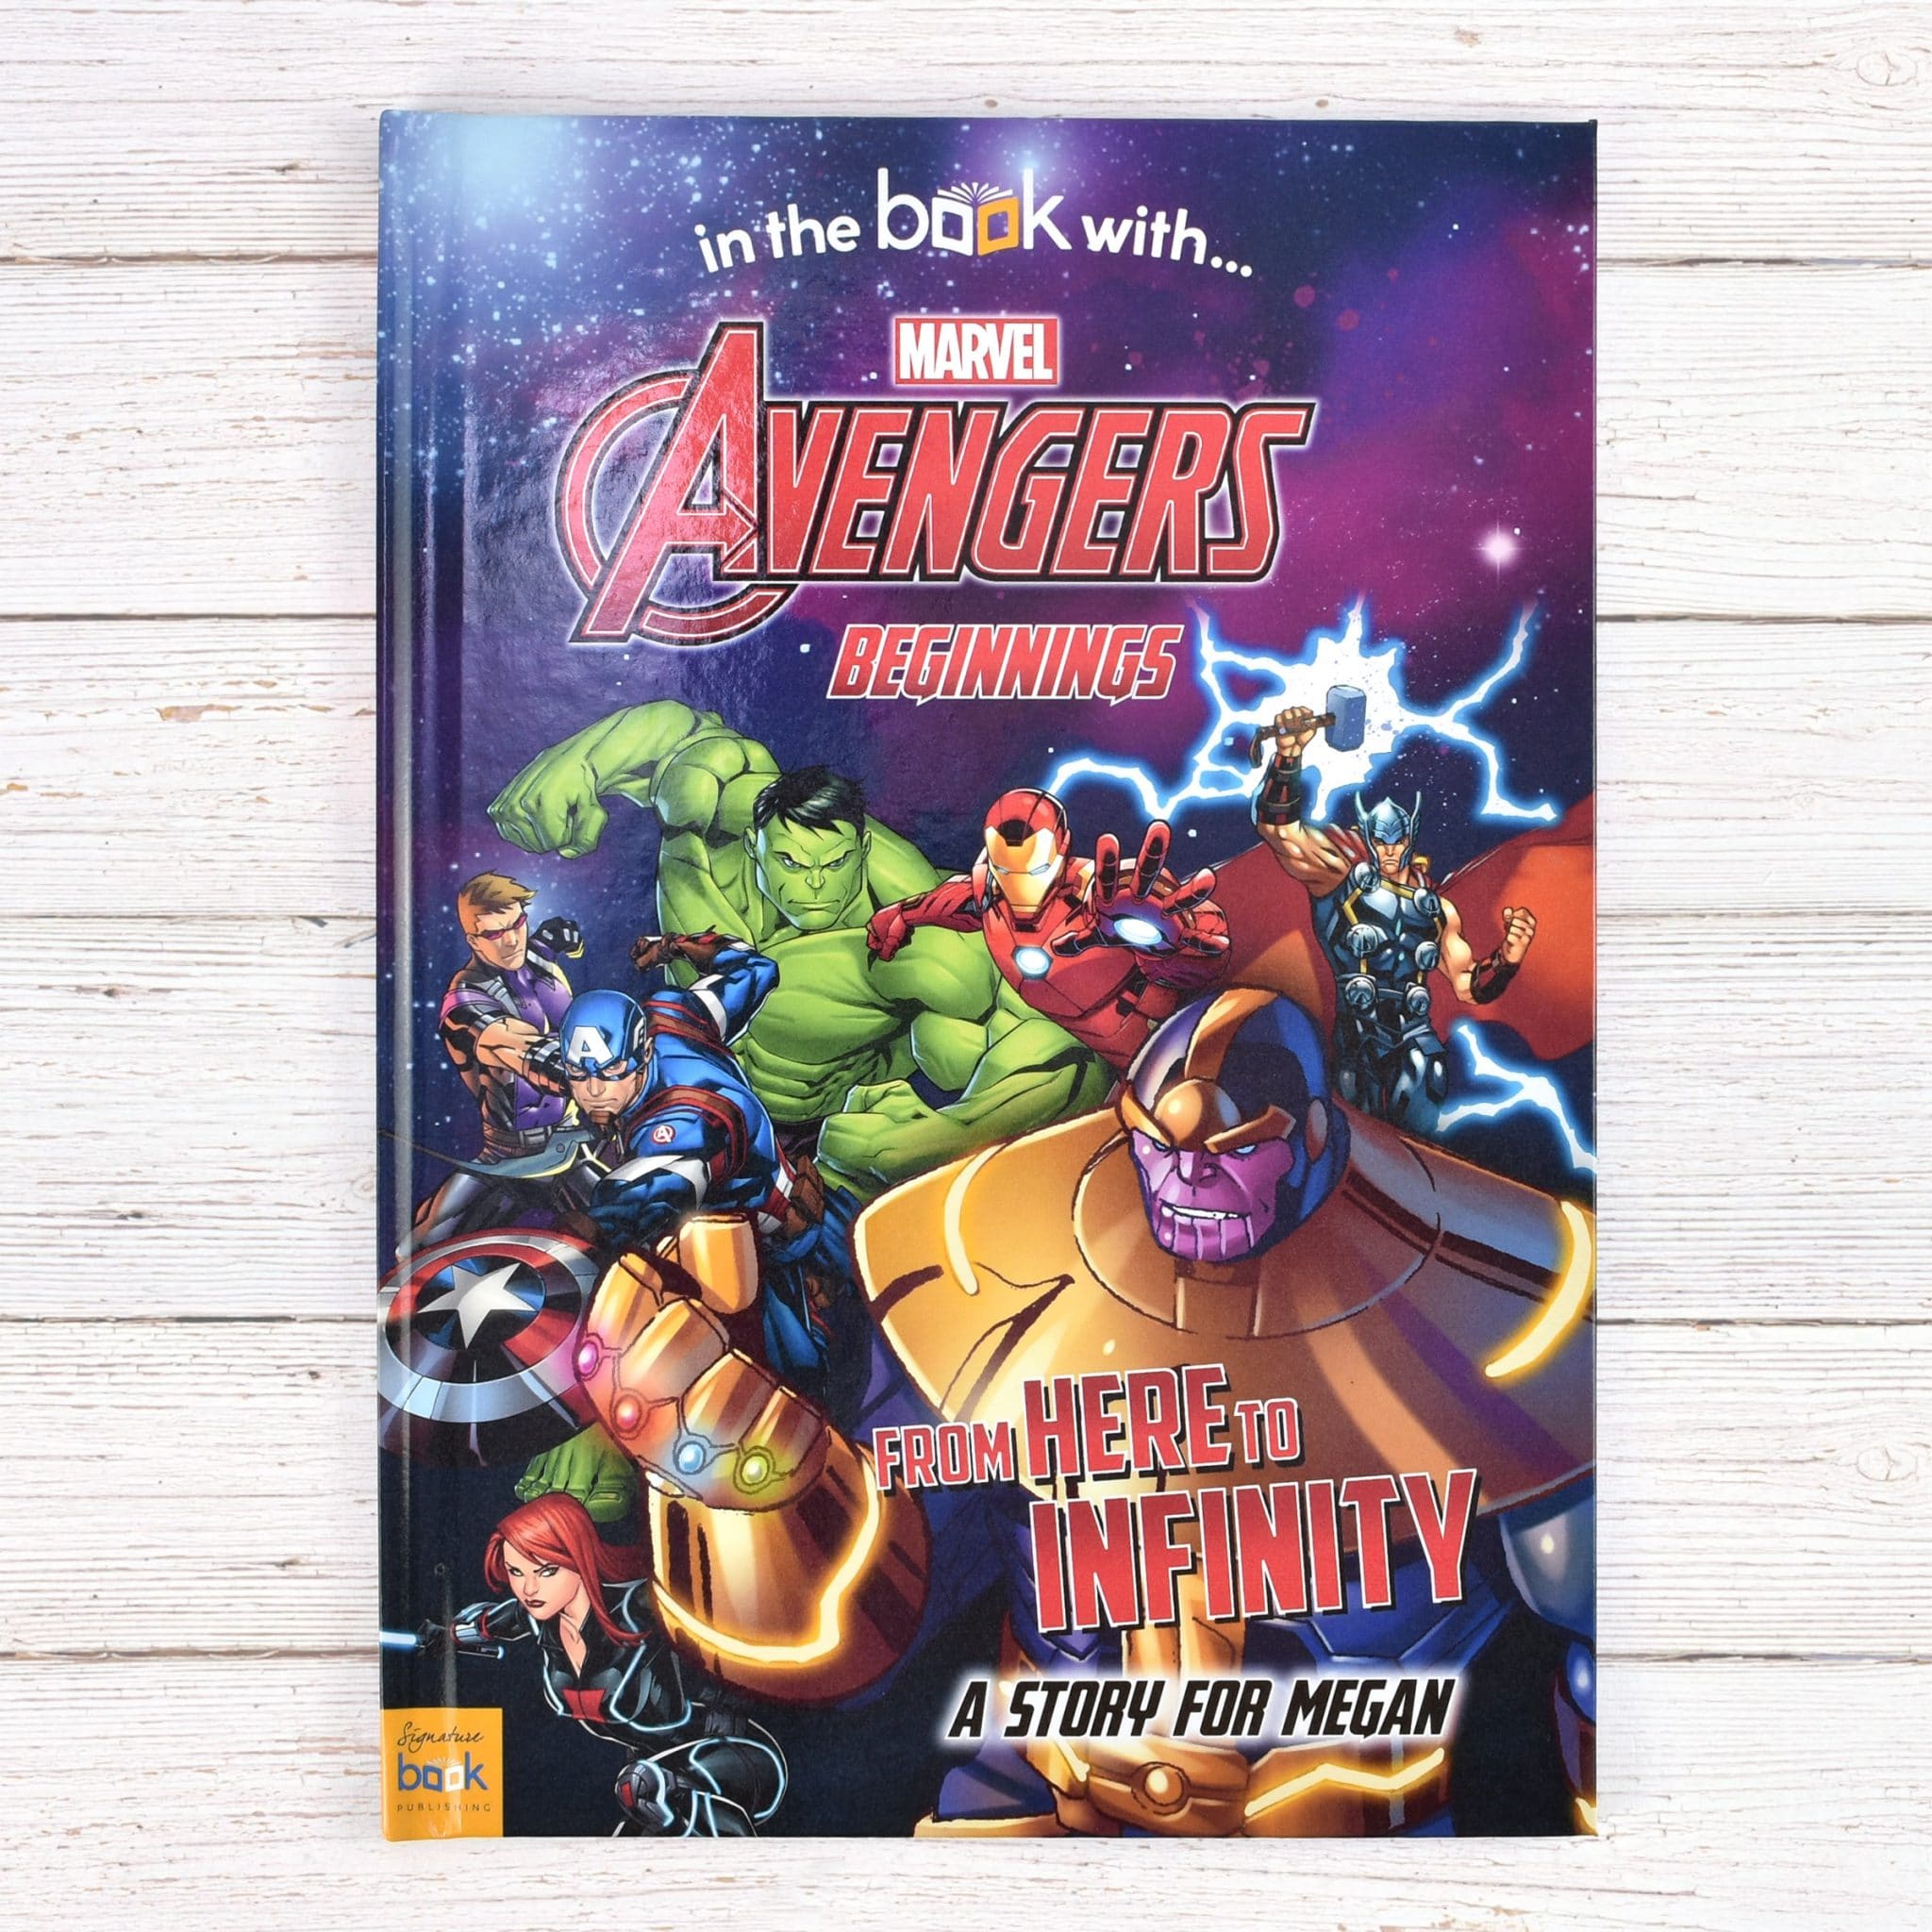 Free Photo Upload Signature Gifts Disney Personalized Books A4 Size Kids Gift Range Child's Name in The Story Avengers 